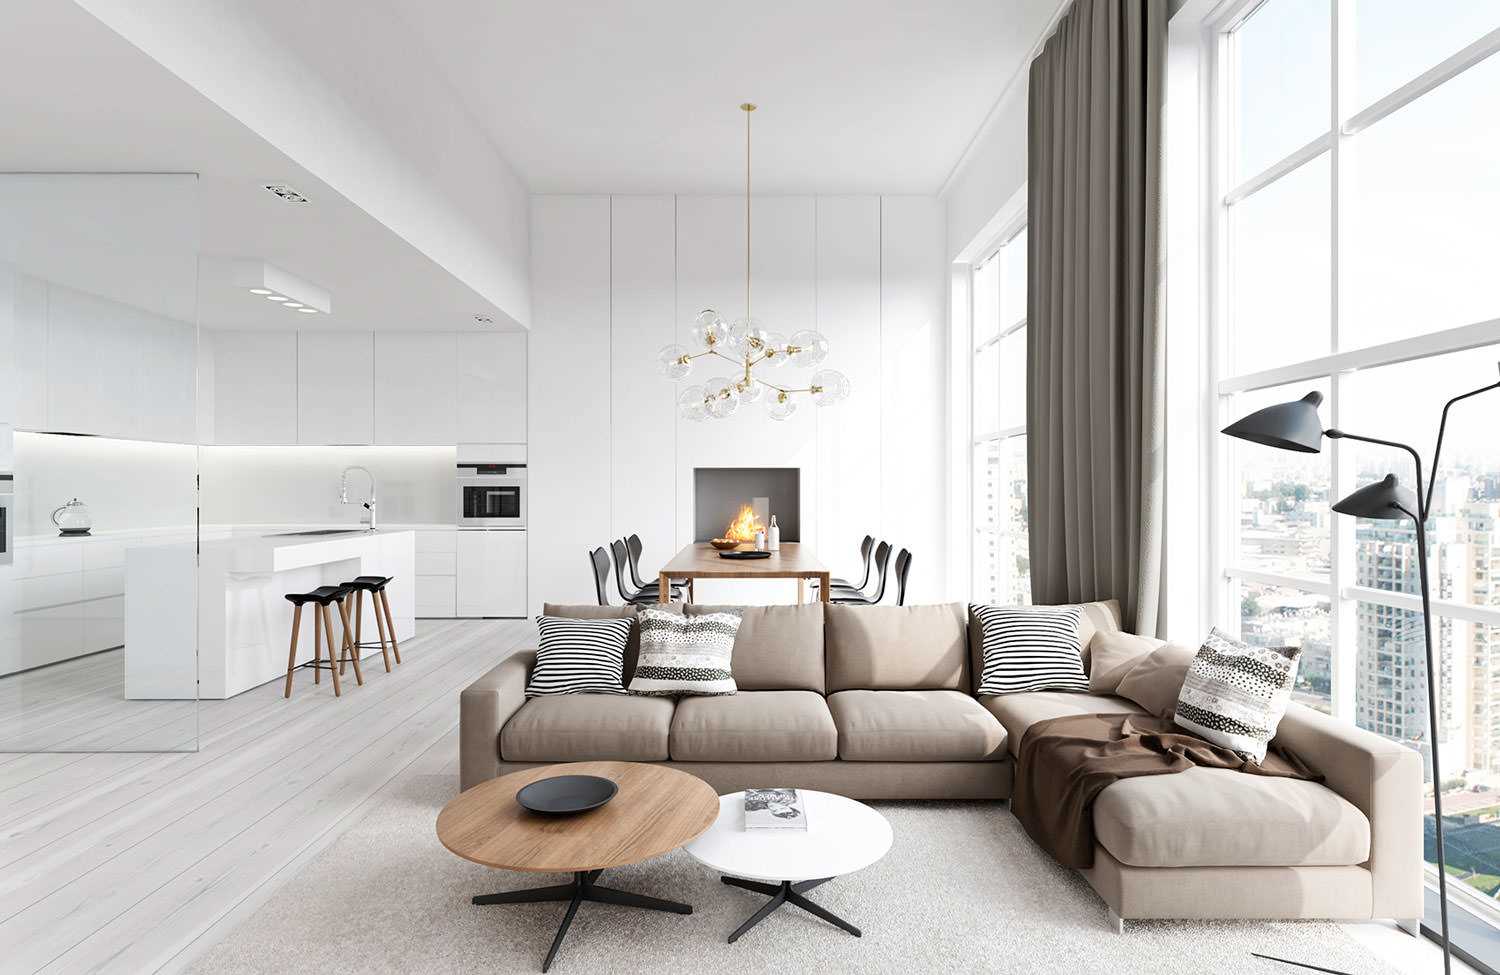 An example of a bright living room decor in the style of minimalism